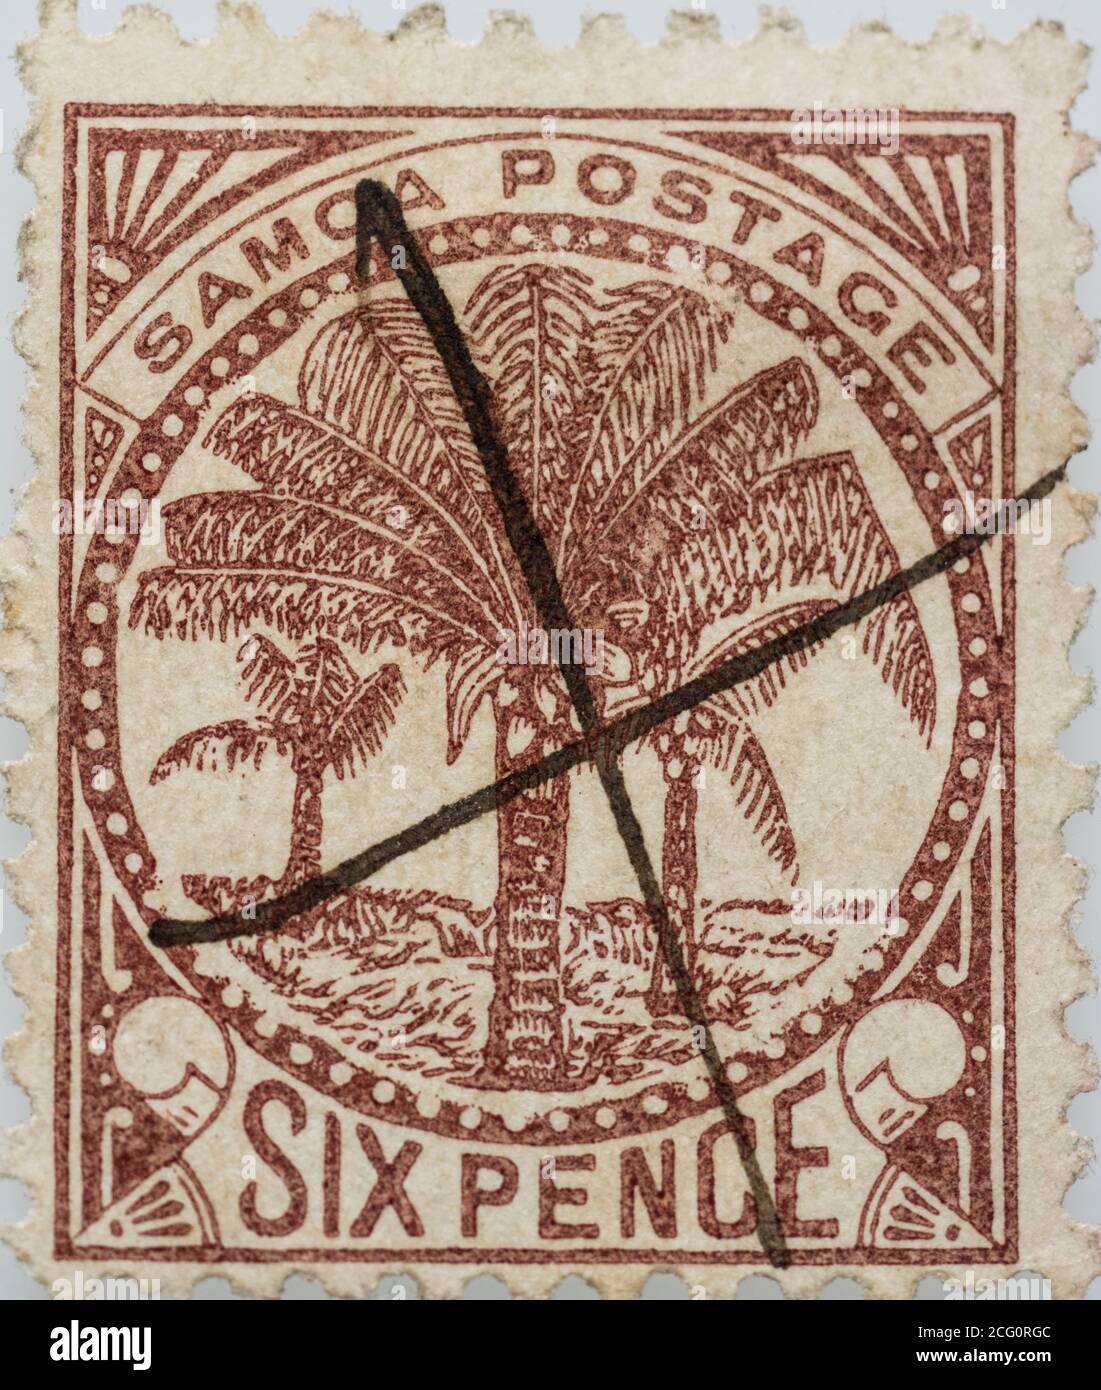 A 6d Palm Tree stamp from the John Davis PO cancelled with an ink cross Stock Photo